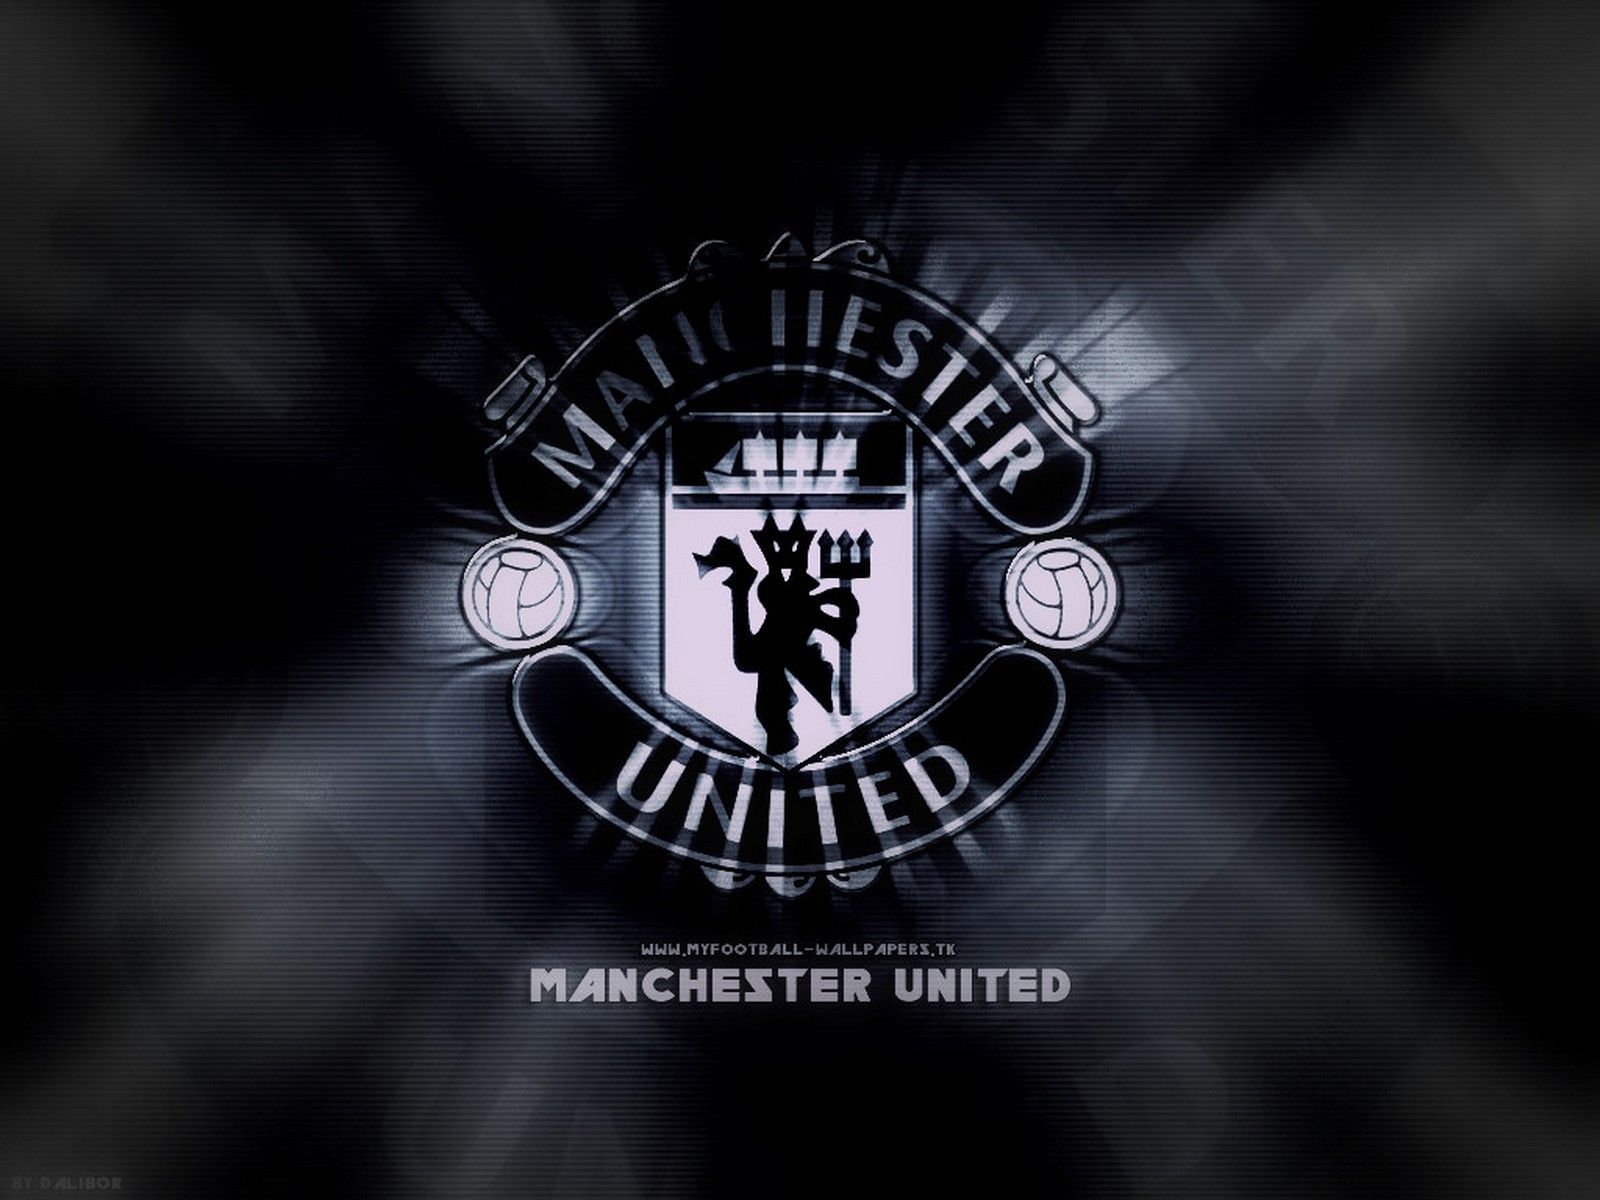 Manchester united black logo wallpaper by dalibor manchester united wallpaper manchester united logo manchester united